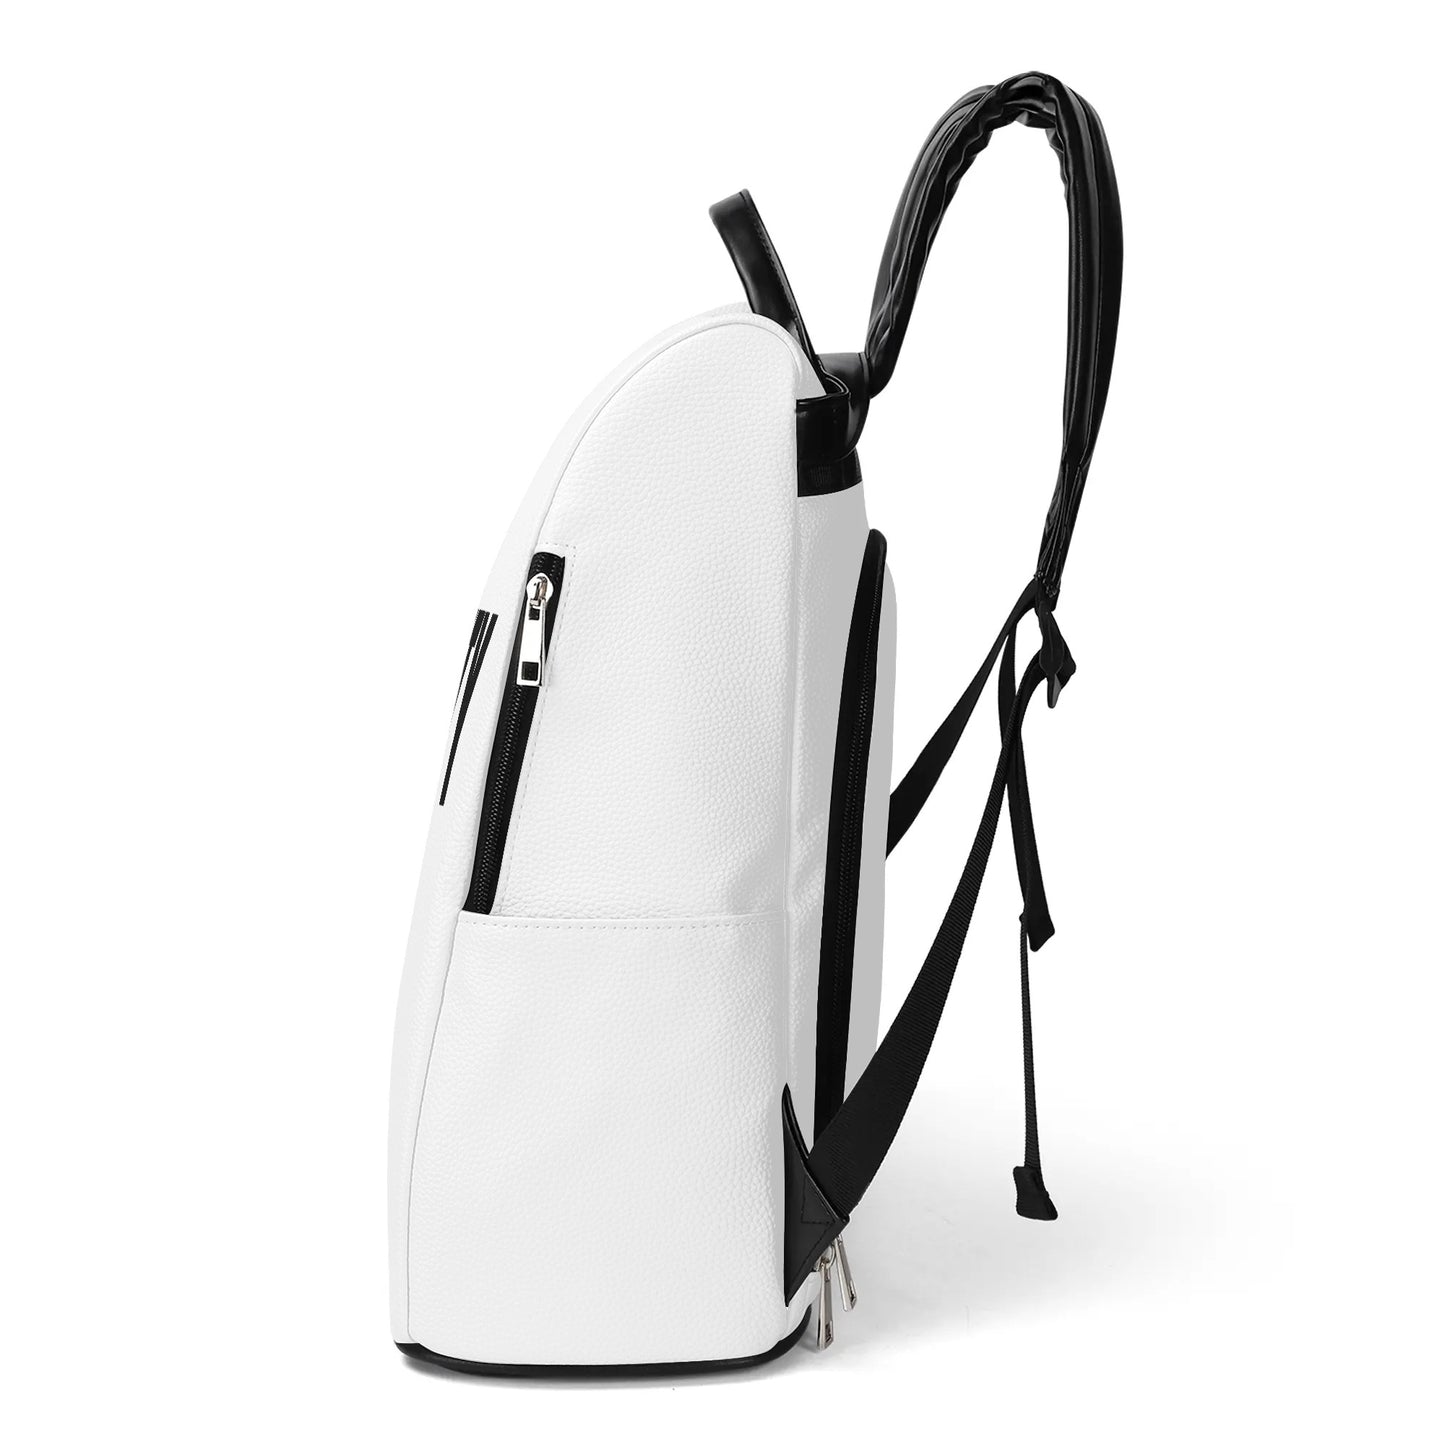 ALL WHITE VEGAN LEATHER ANTI-THEFT BACKPACK